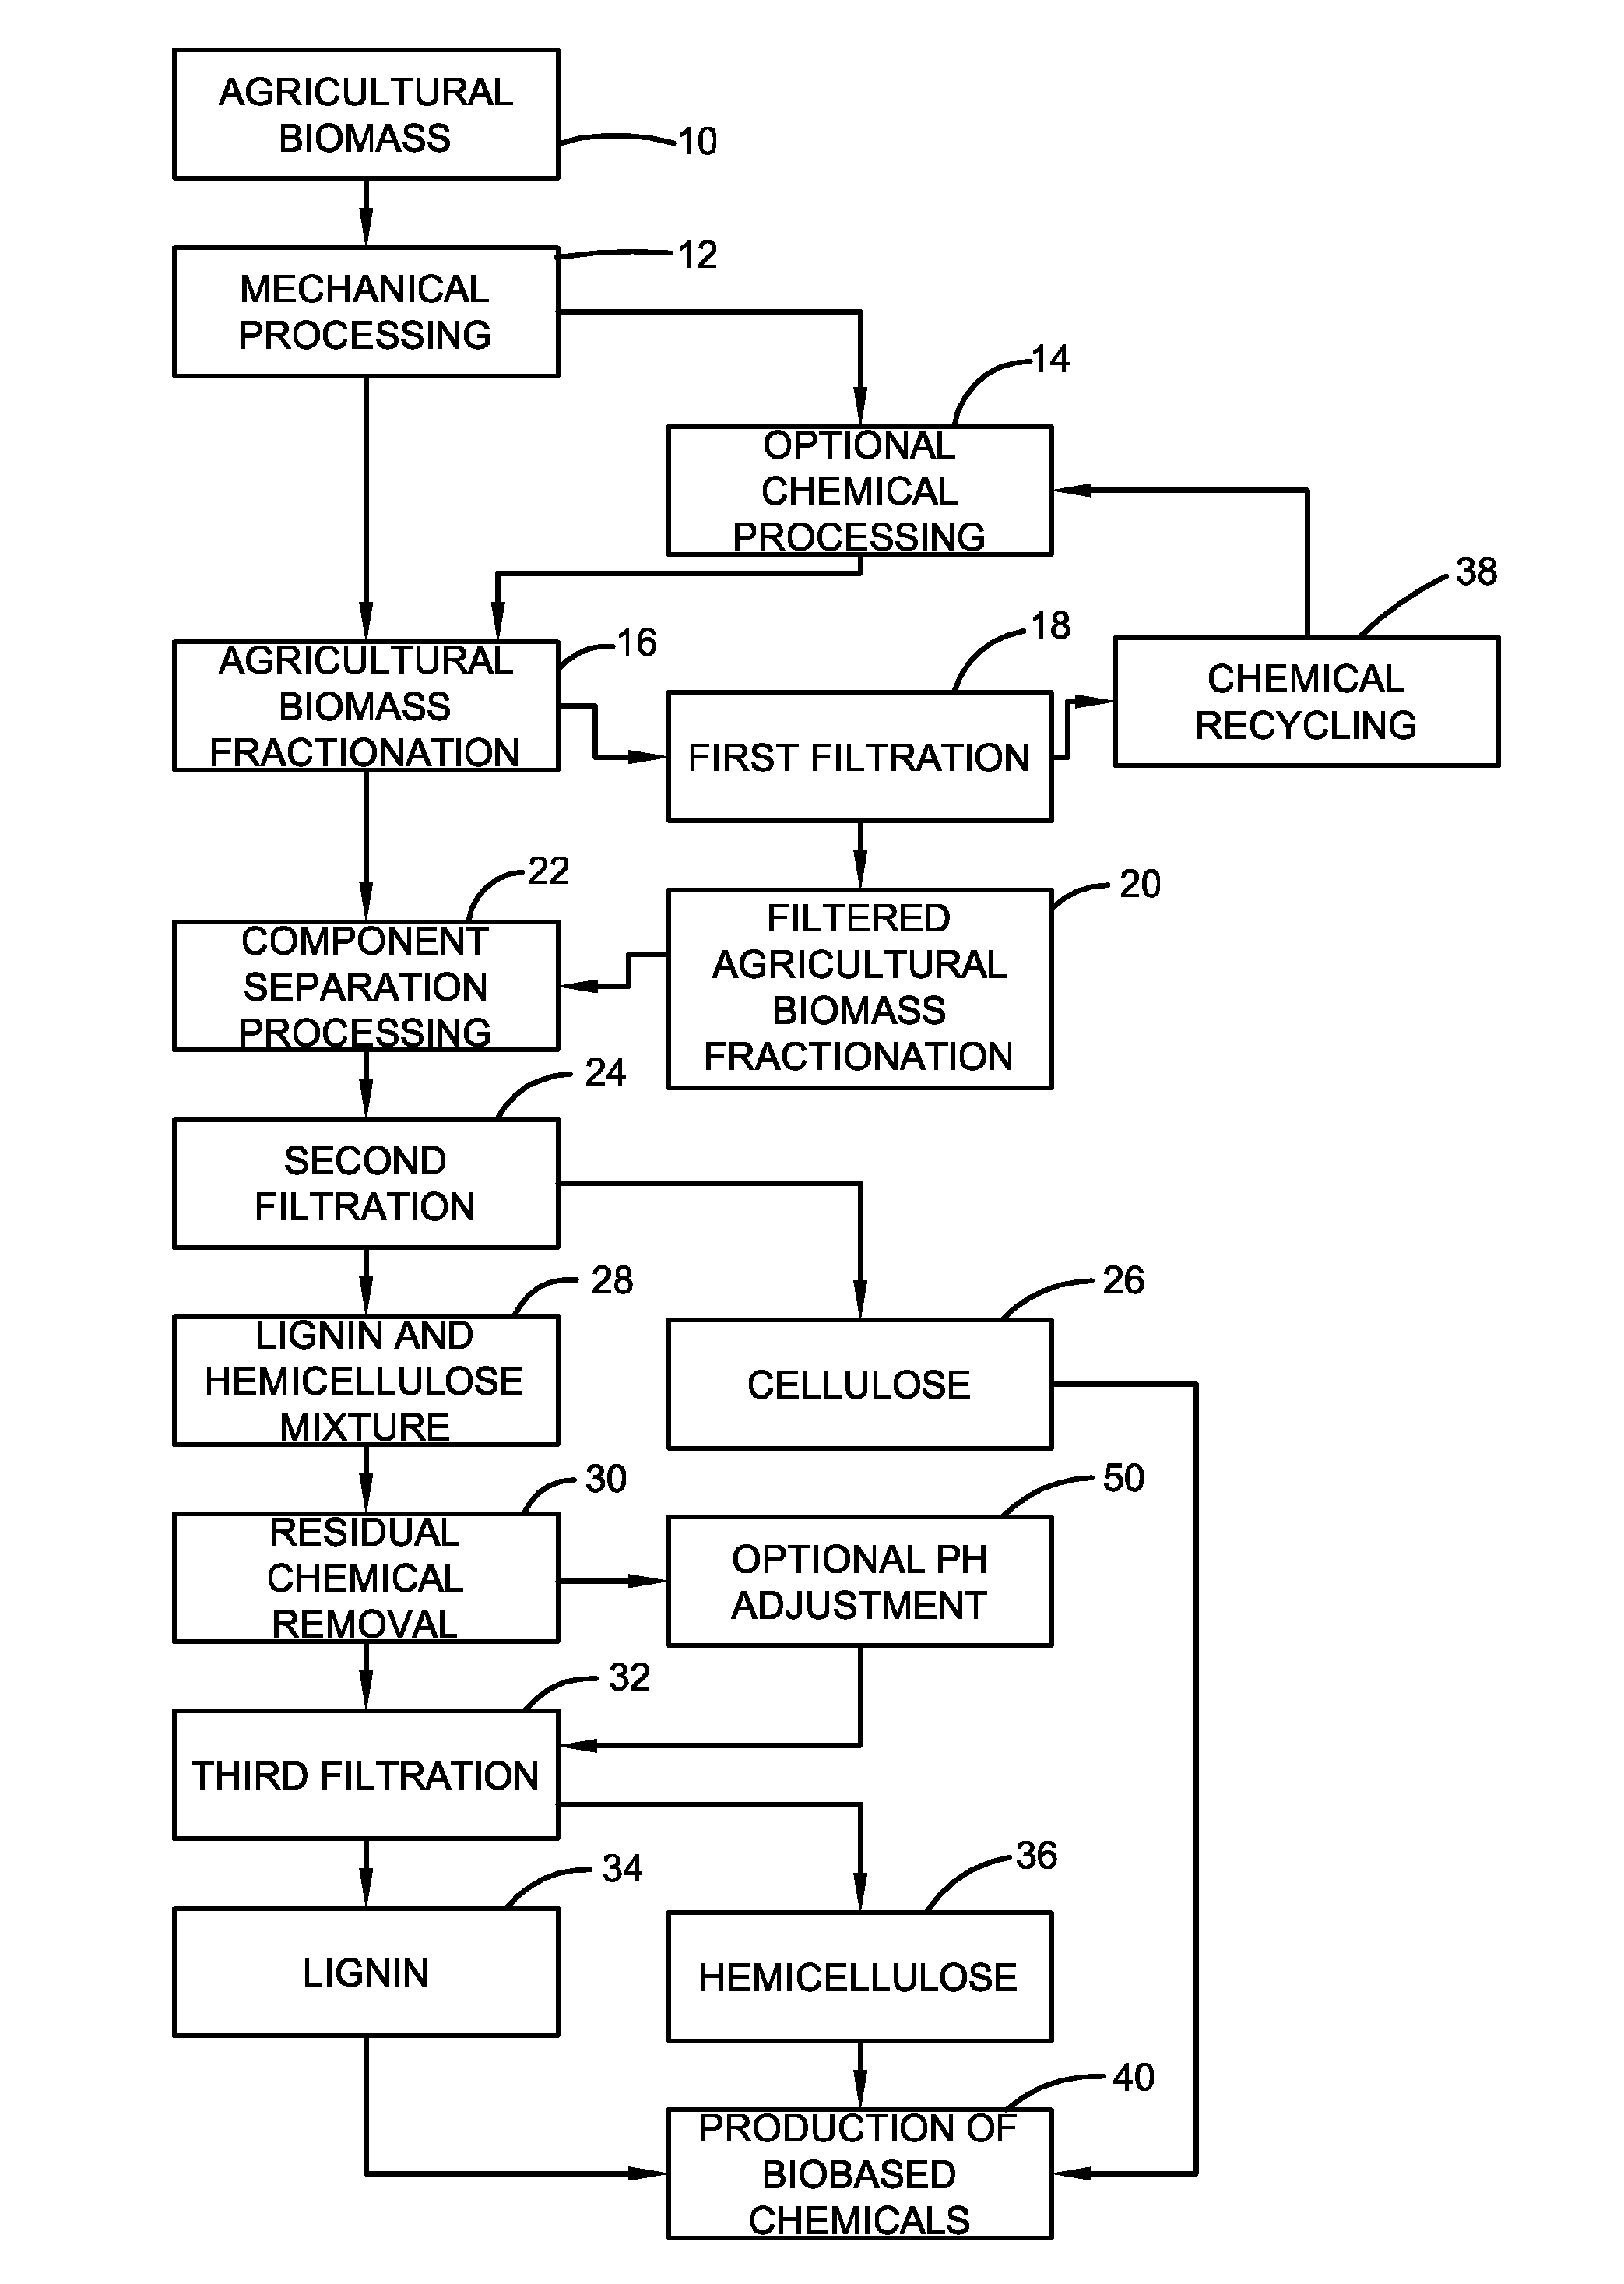 Method for producing biobased chemicals from agricultural biomass